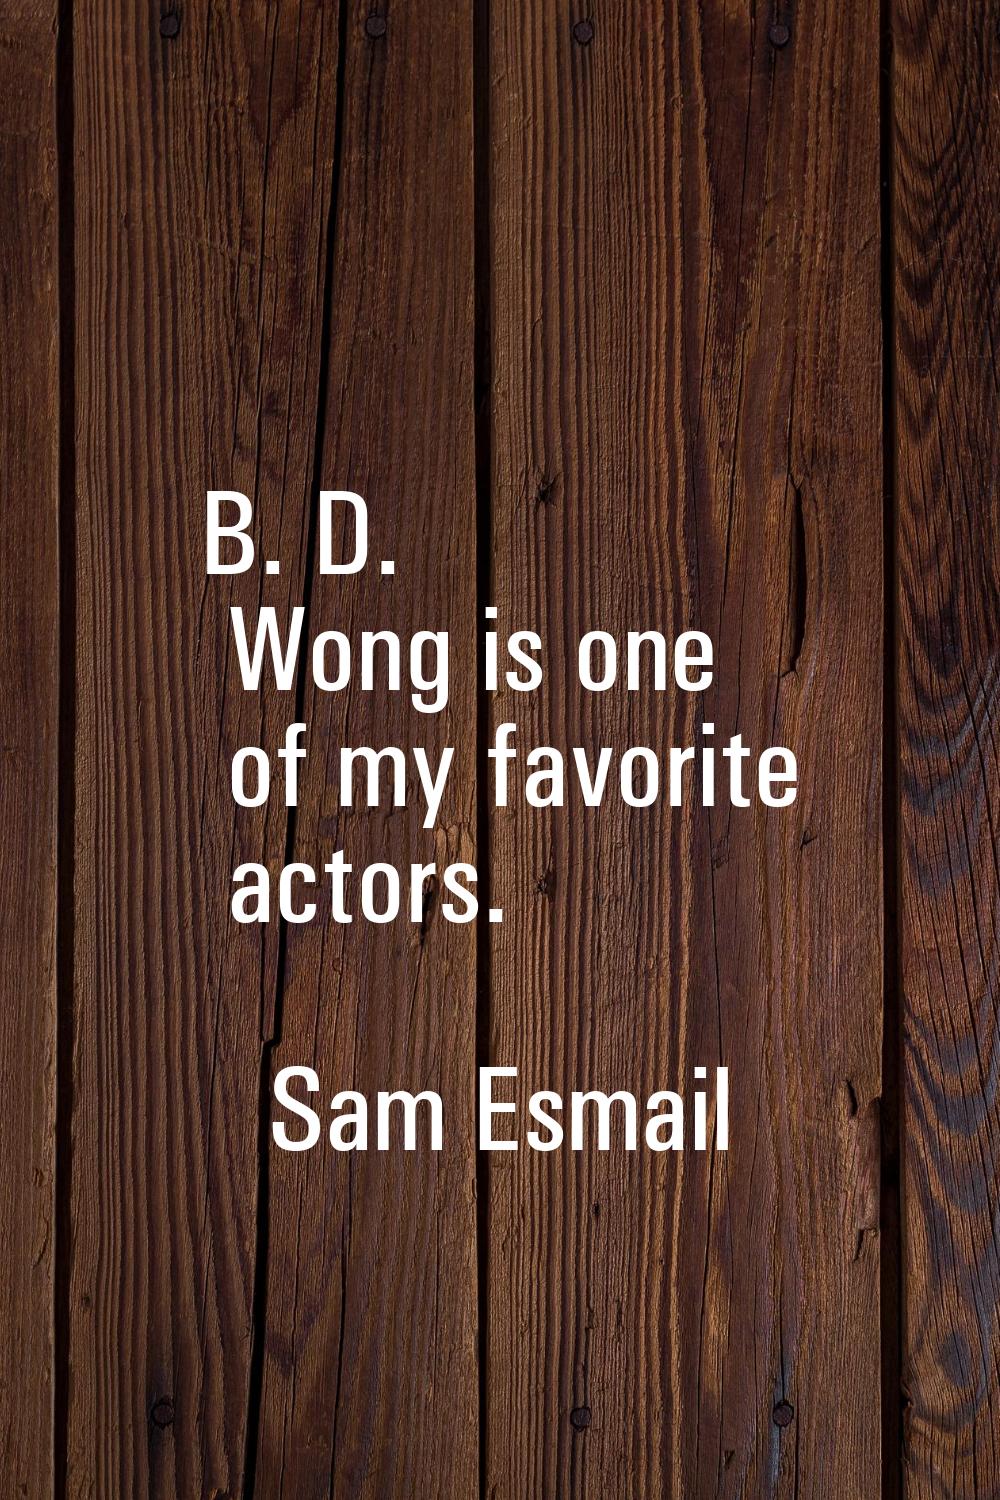 B. D. Wong is one of my favorite actors.